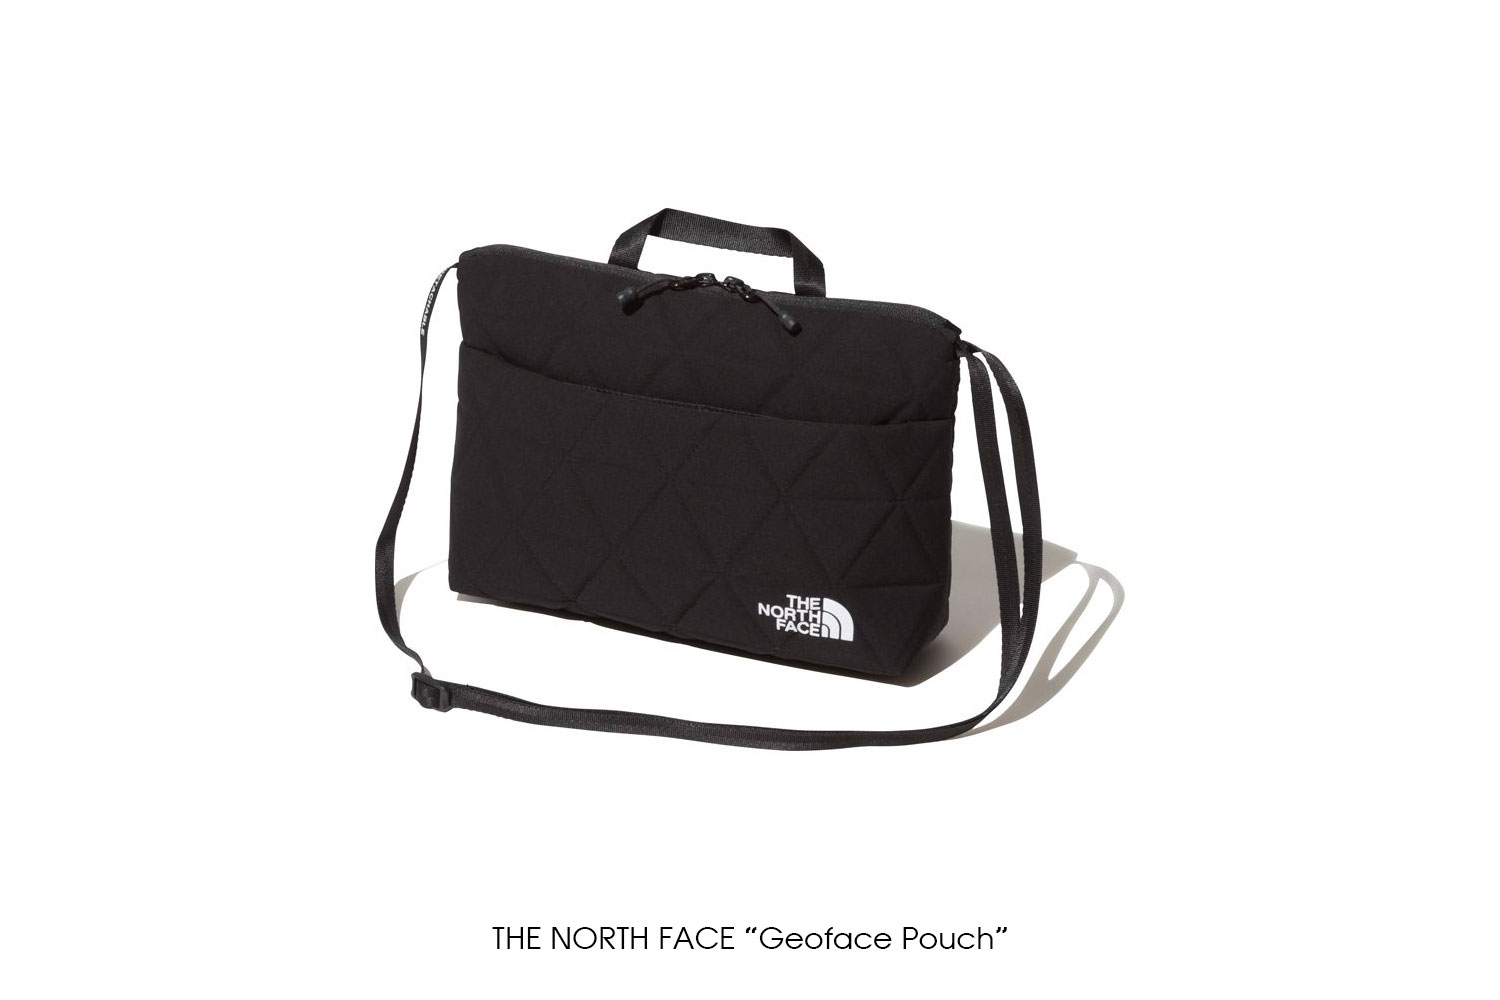 THE NORTH FACE "Geoface Pouch"